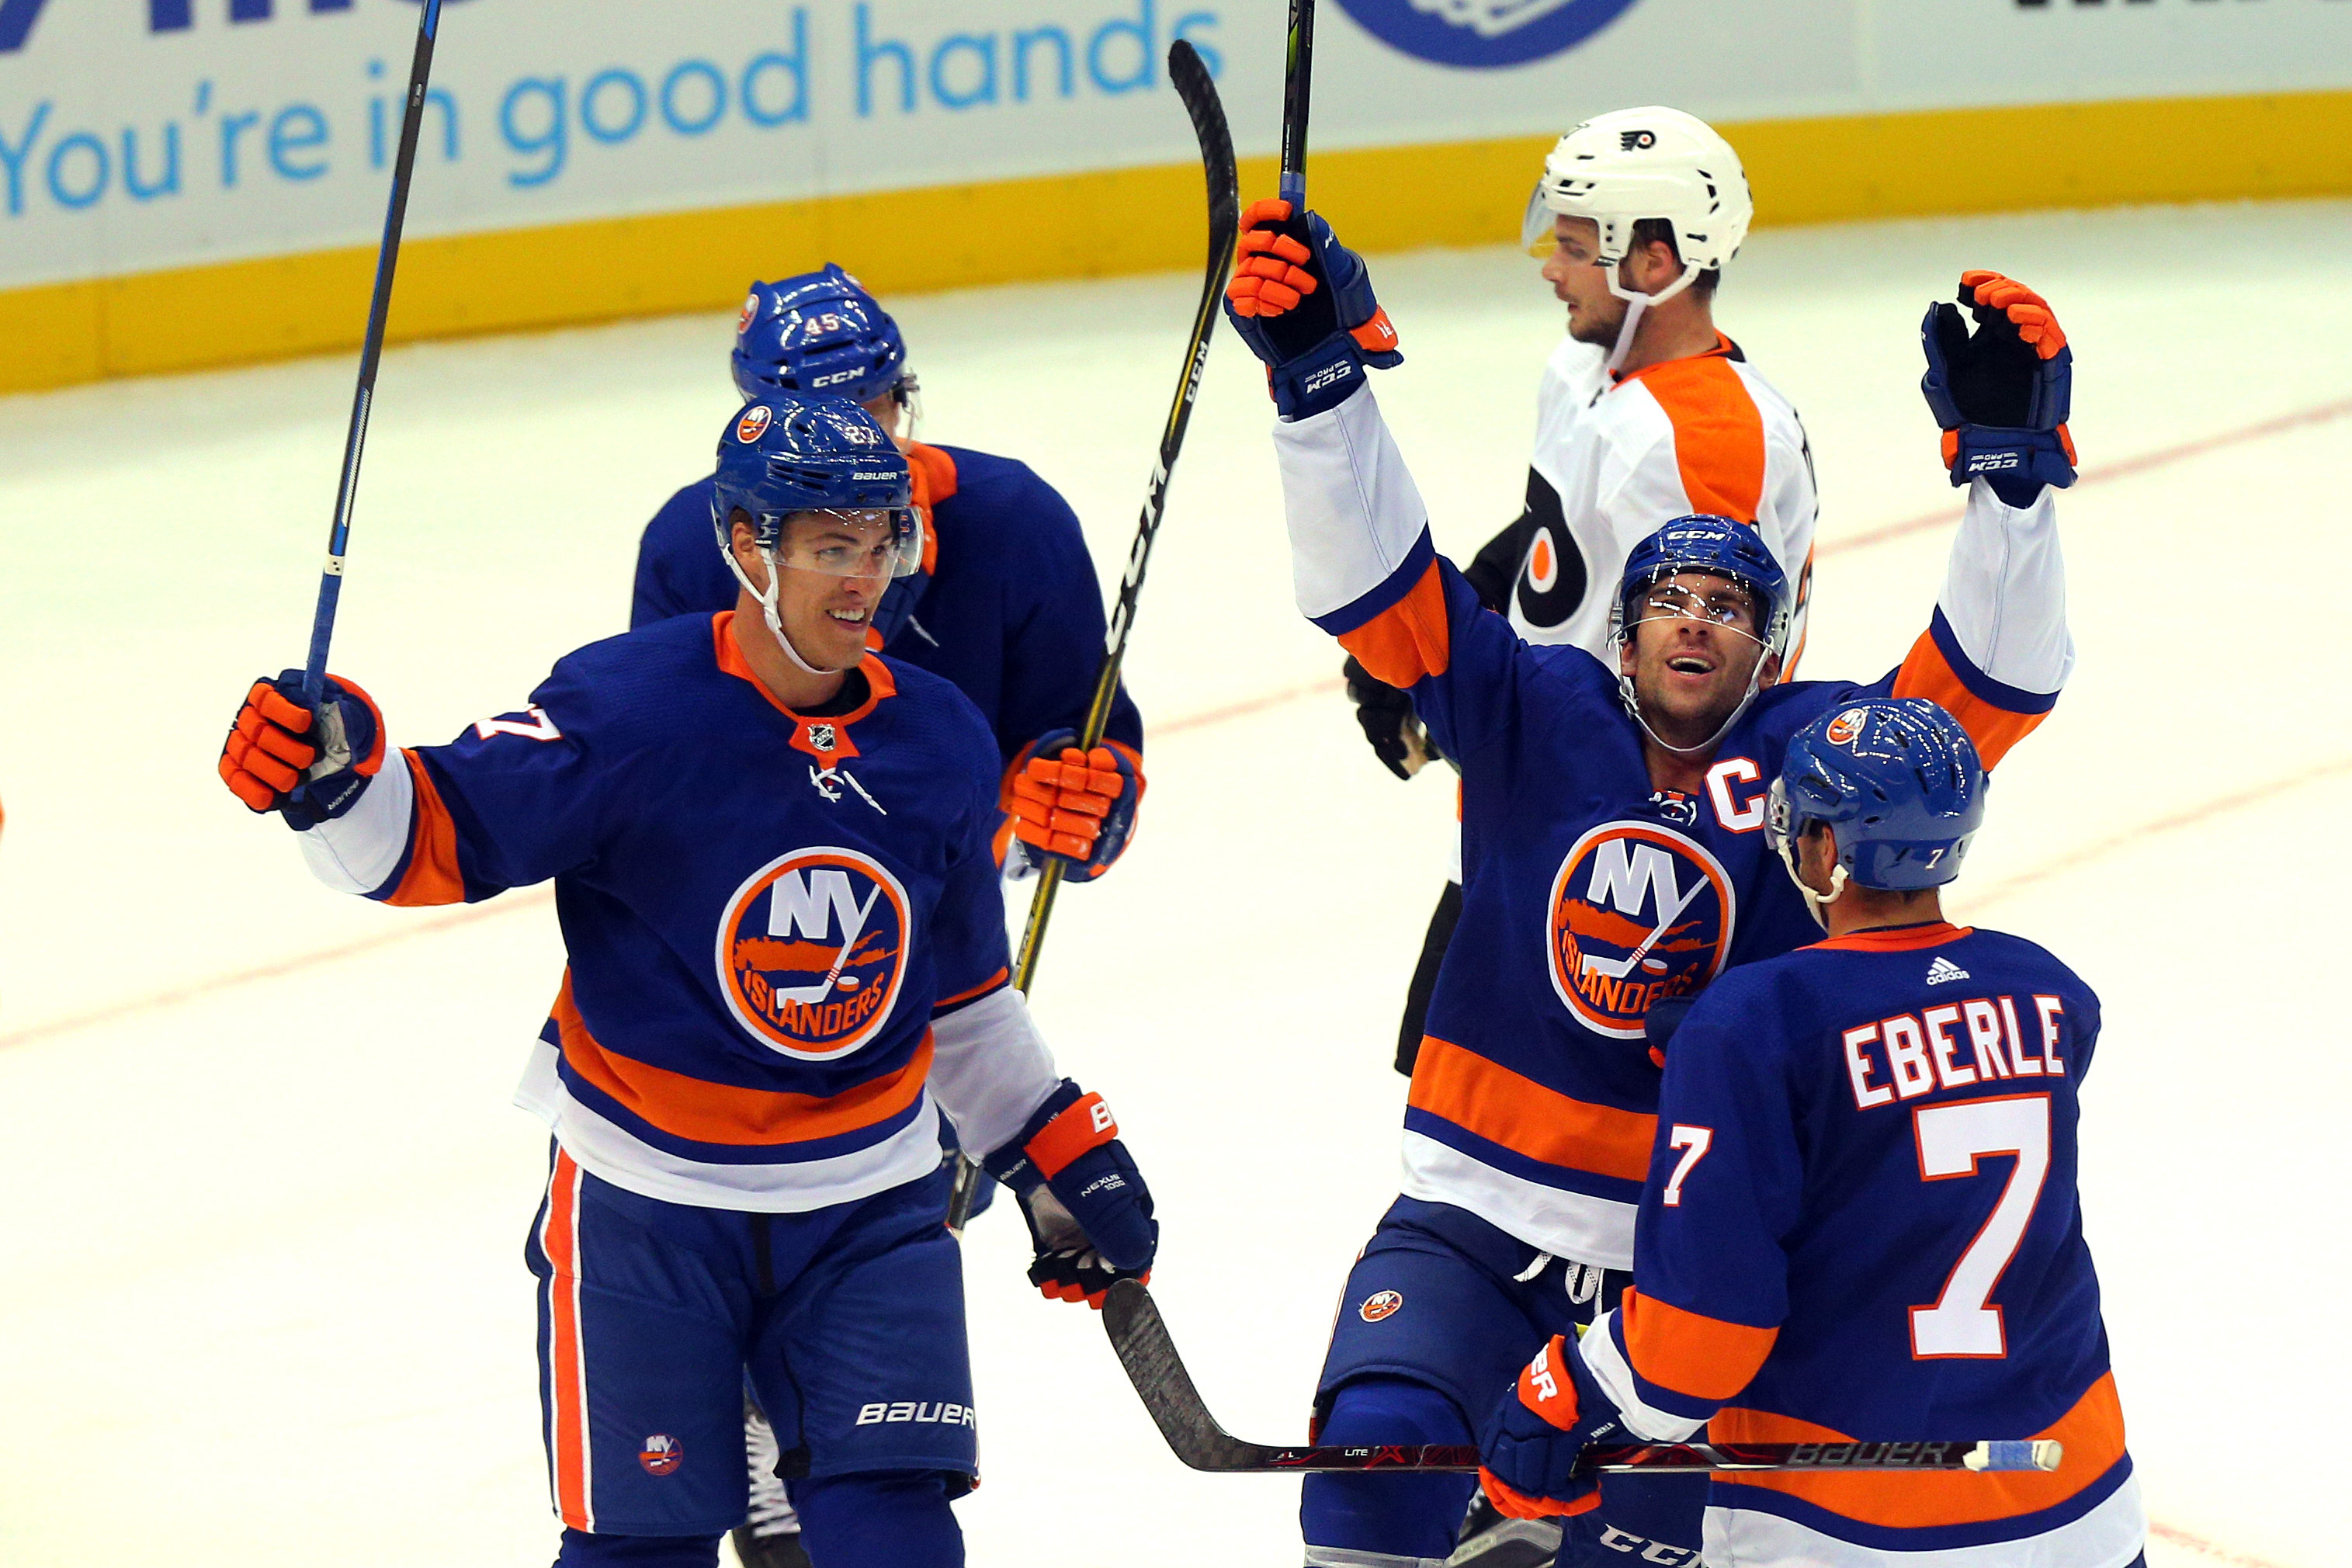 Sep 17, 2017; Uniondale, NY, USA; New York Islanders center John Tavares (91) celebrates his goal against the Philadelphia Flyers with center Anders Lee (27) and right wing Jordan Eberle (7) during the second period of a preseason game at NYCB Live at the Nassau Veterans Memorial Coliseum. Mandatory Credit: Brad Penner-USA TODAY Sports